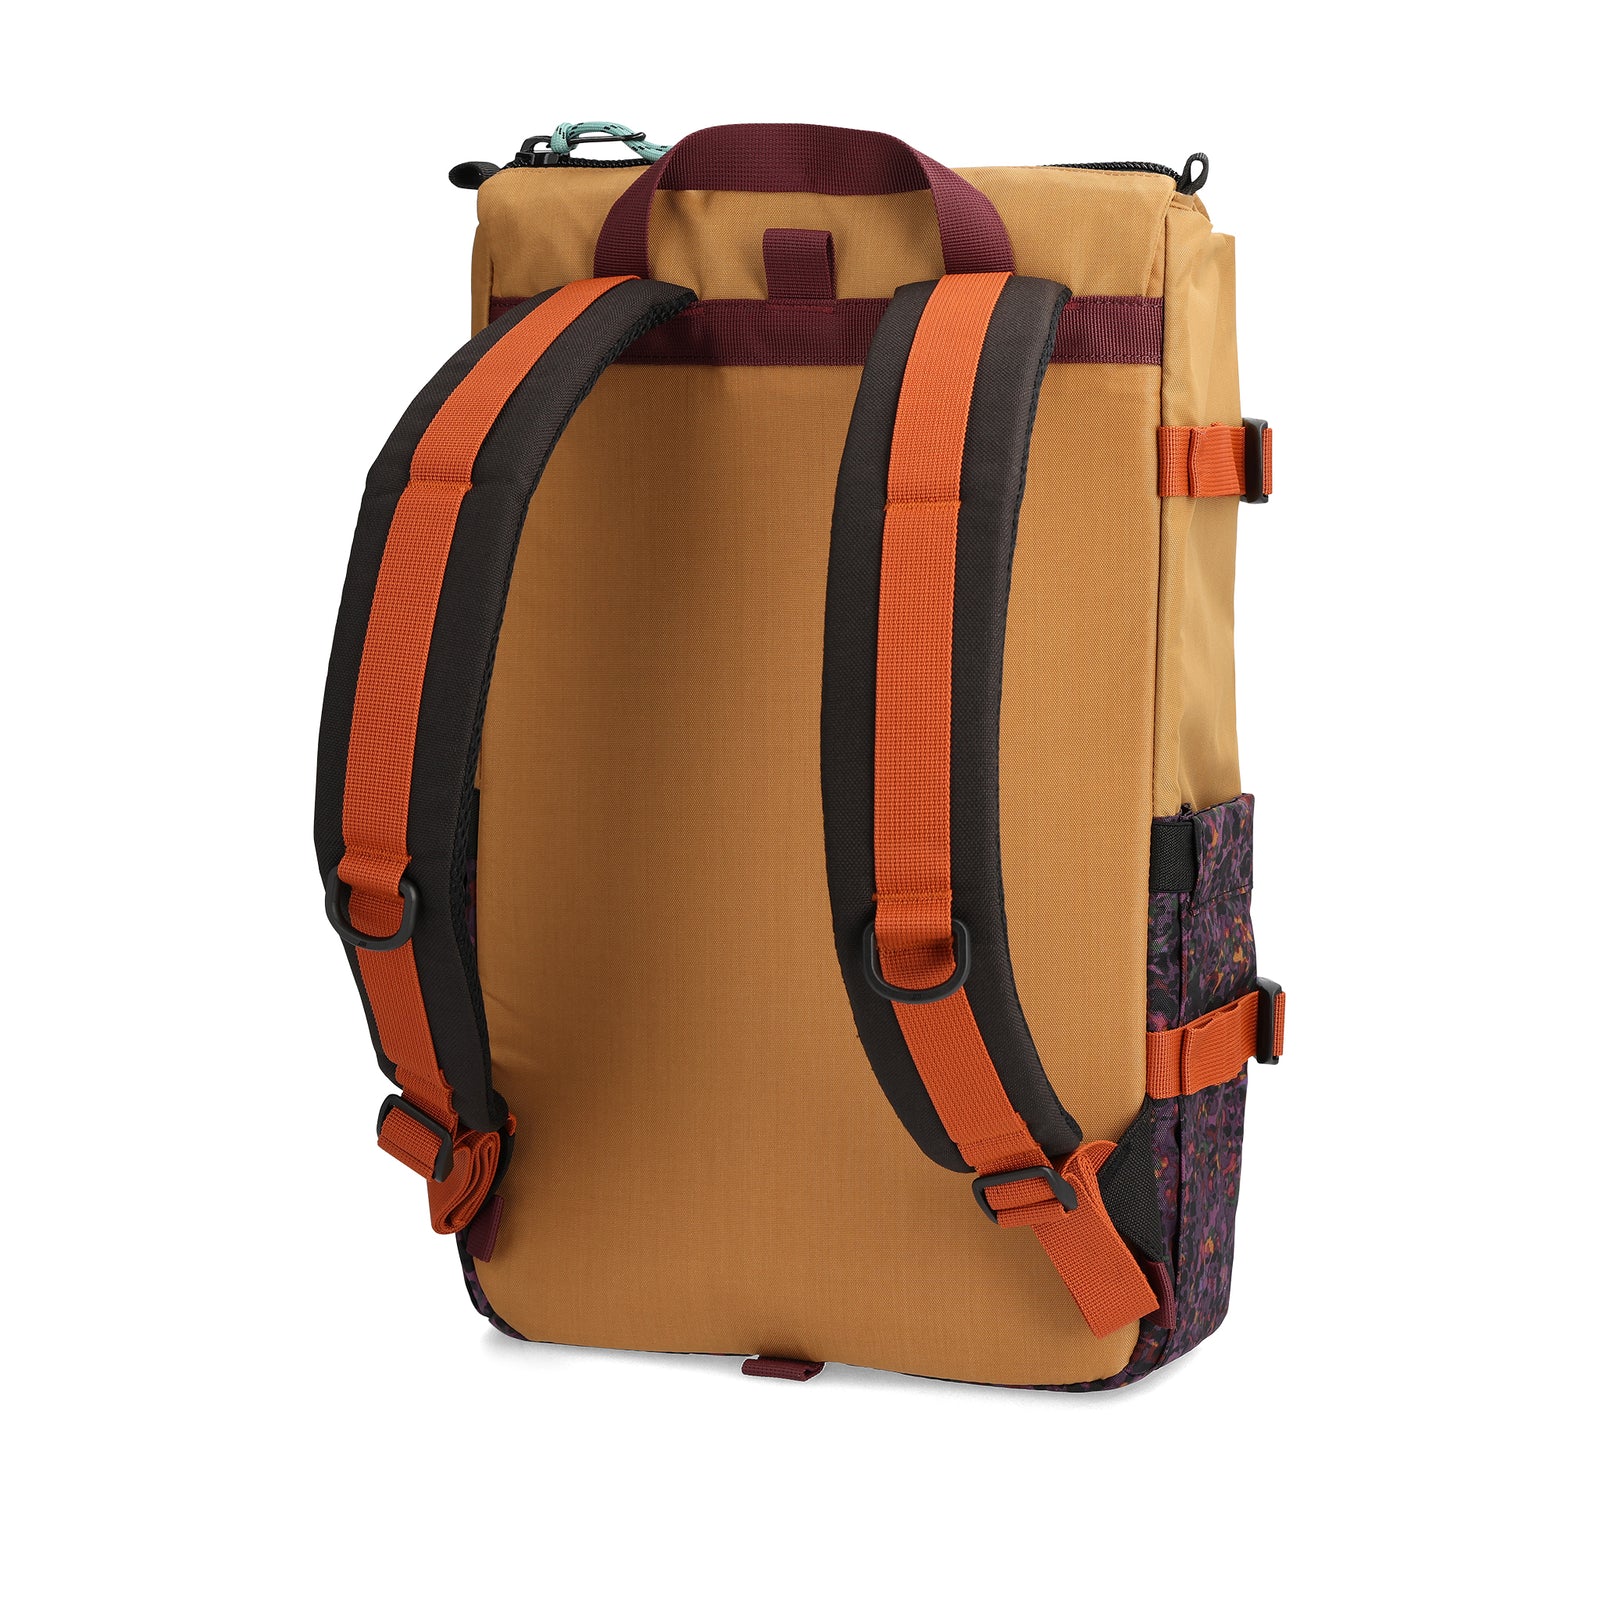 Back View of Topo Designs Rover Pack Classic in "Khaki / Black Meteor"